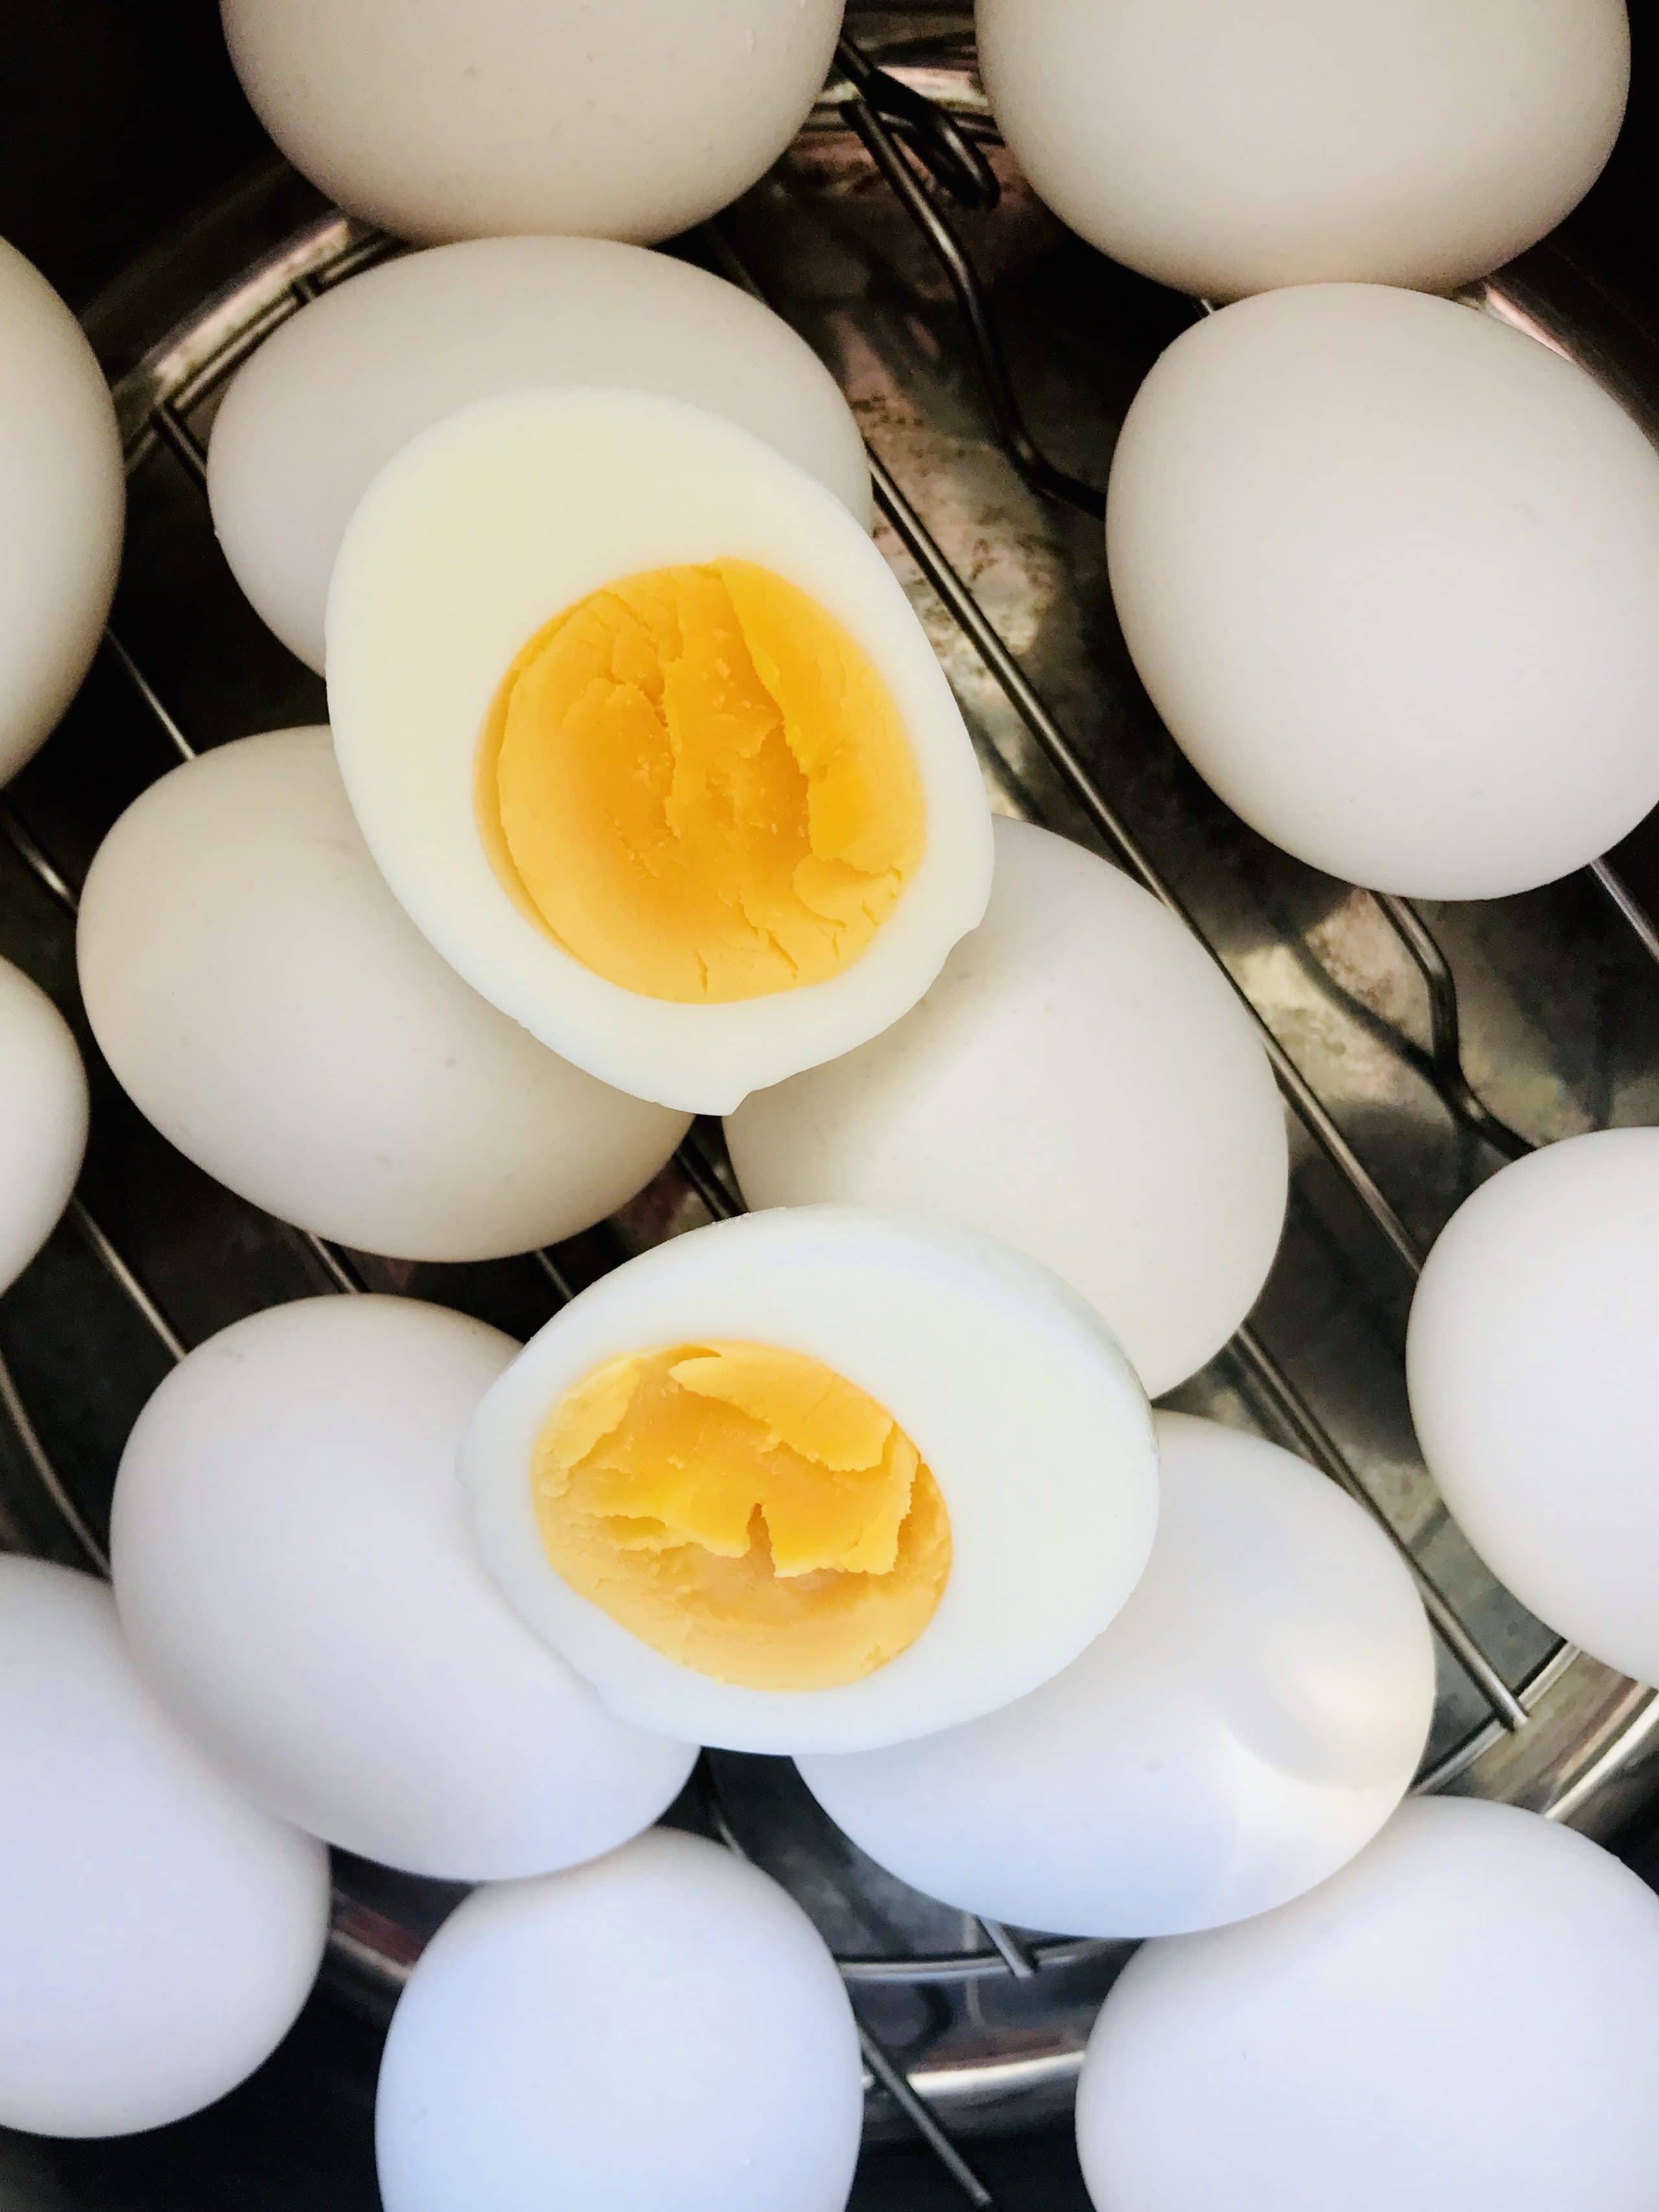 Hard boiled eggs are a staple. From a quick, on-the go breakfast or snack to a key ingredient for deviled eggs, Cobb Salad, egg salad, and more. Instant Pot Hard Boiled eggs are even easier than the stovetop version and are MUCH easier to peel. How to at KathleensCravings.com #InstantPotEggs #EasyPeelEggs #IPHardBoiledEggs